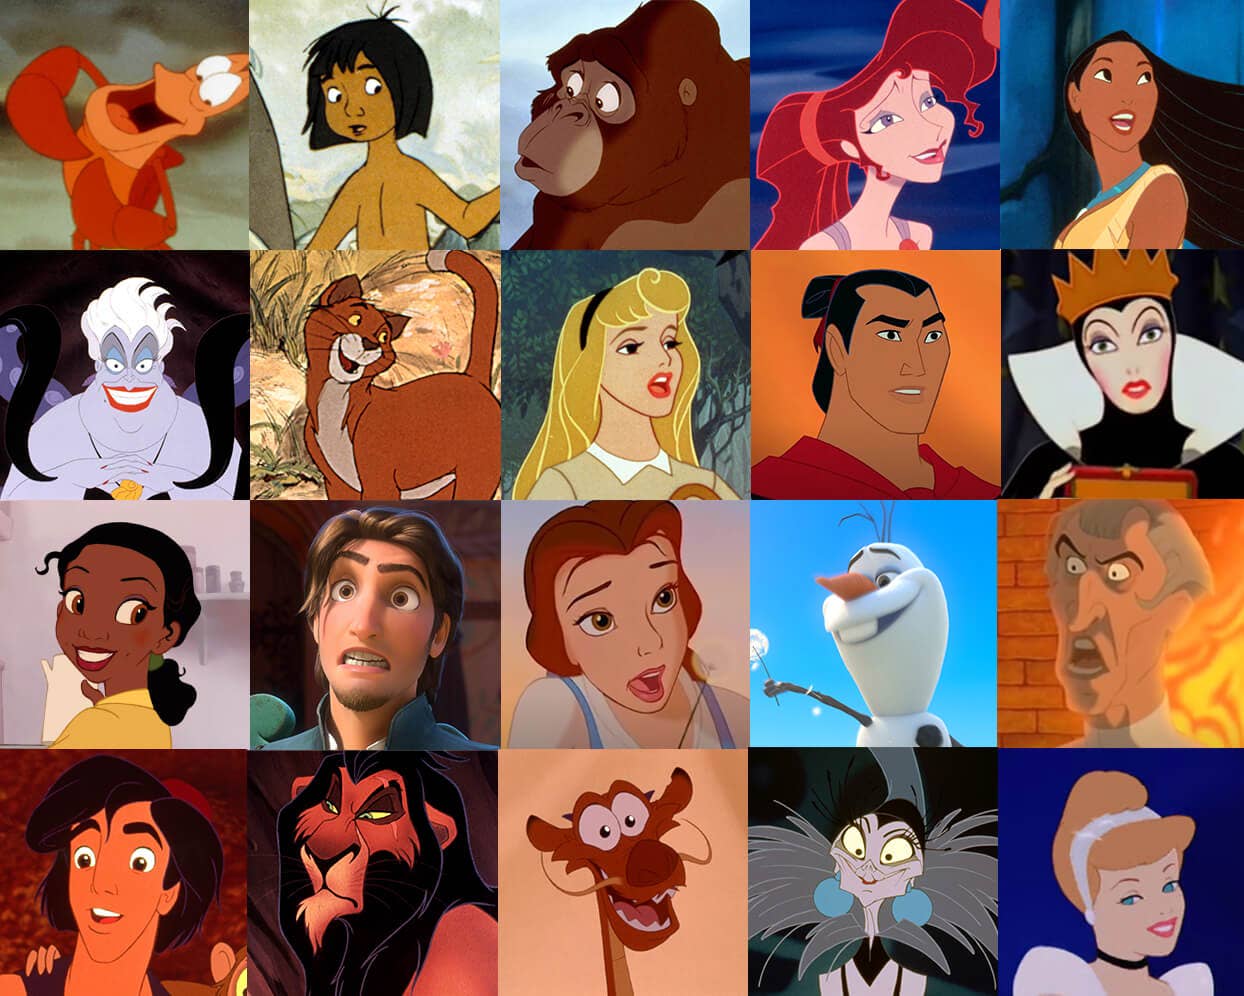 Guess The Disney Character From A Two-Word Description